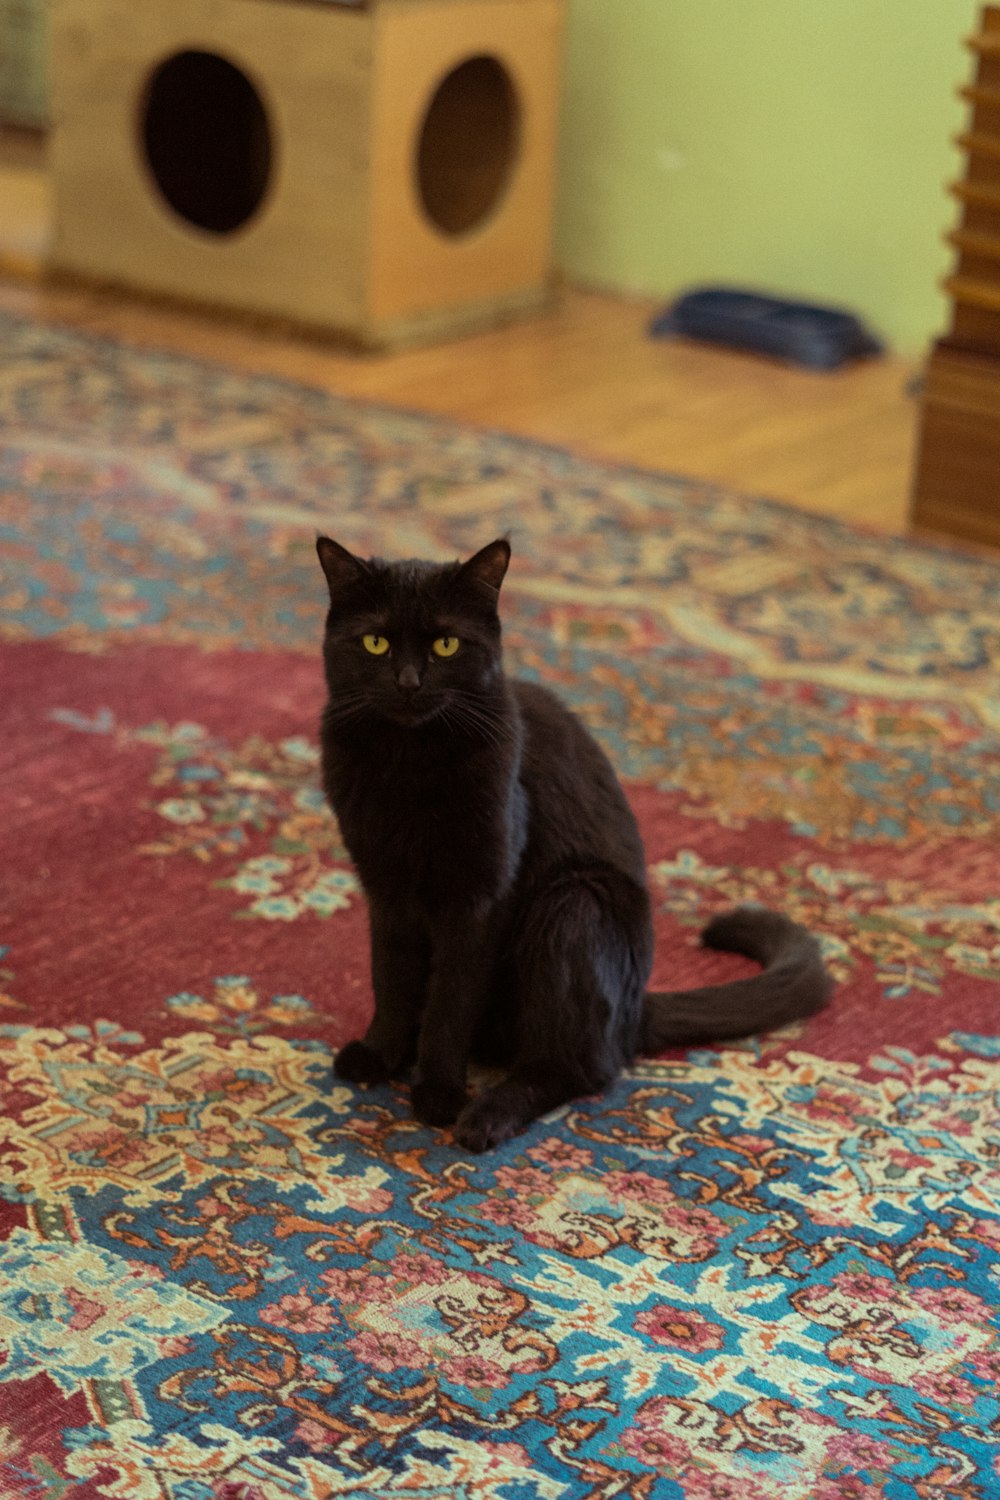 a black cat sitting on a rug in a room